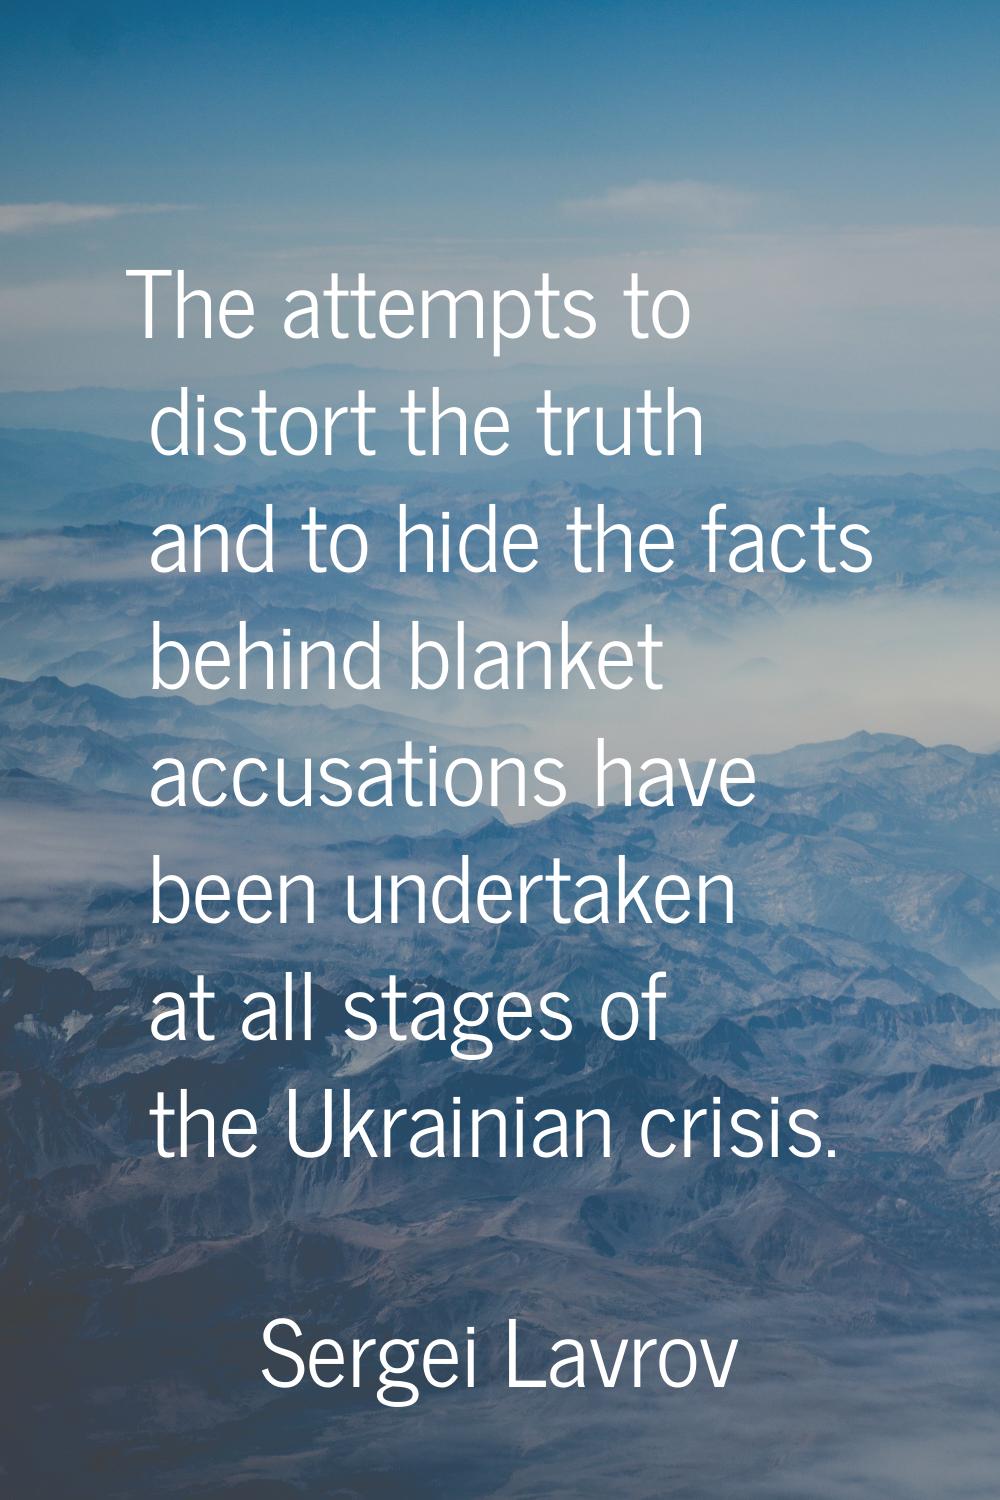 The attempts to distort the truth and to hide the facts behind blanket accusations have been undert